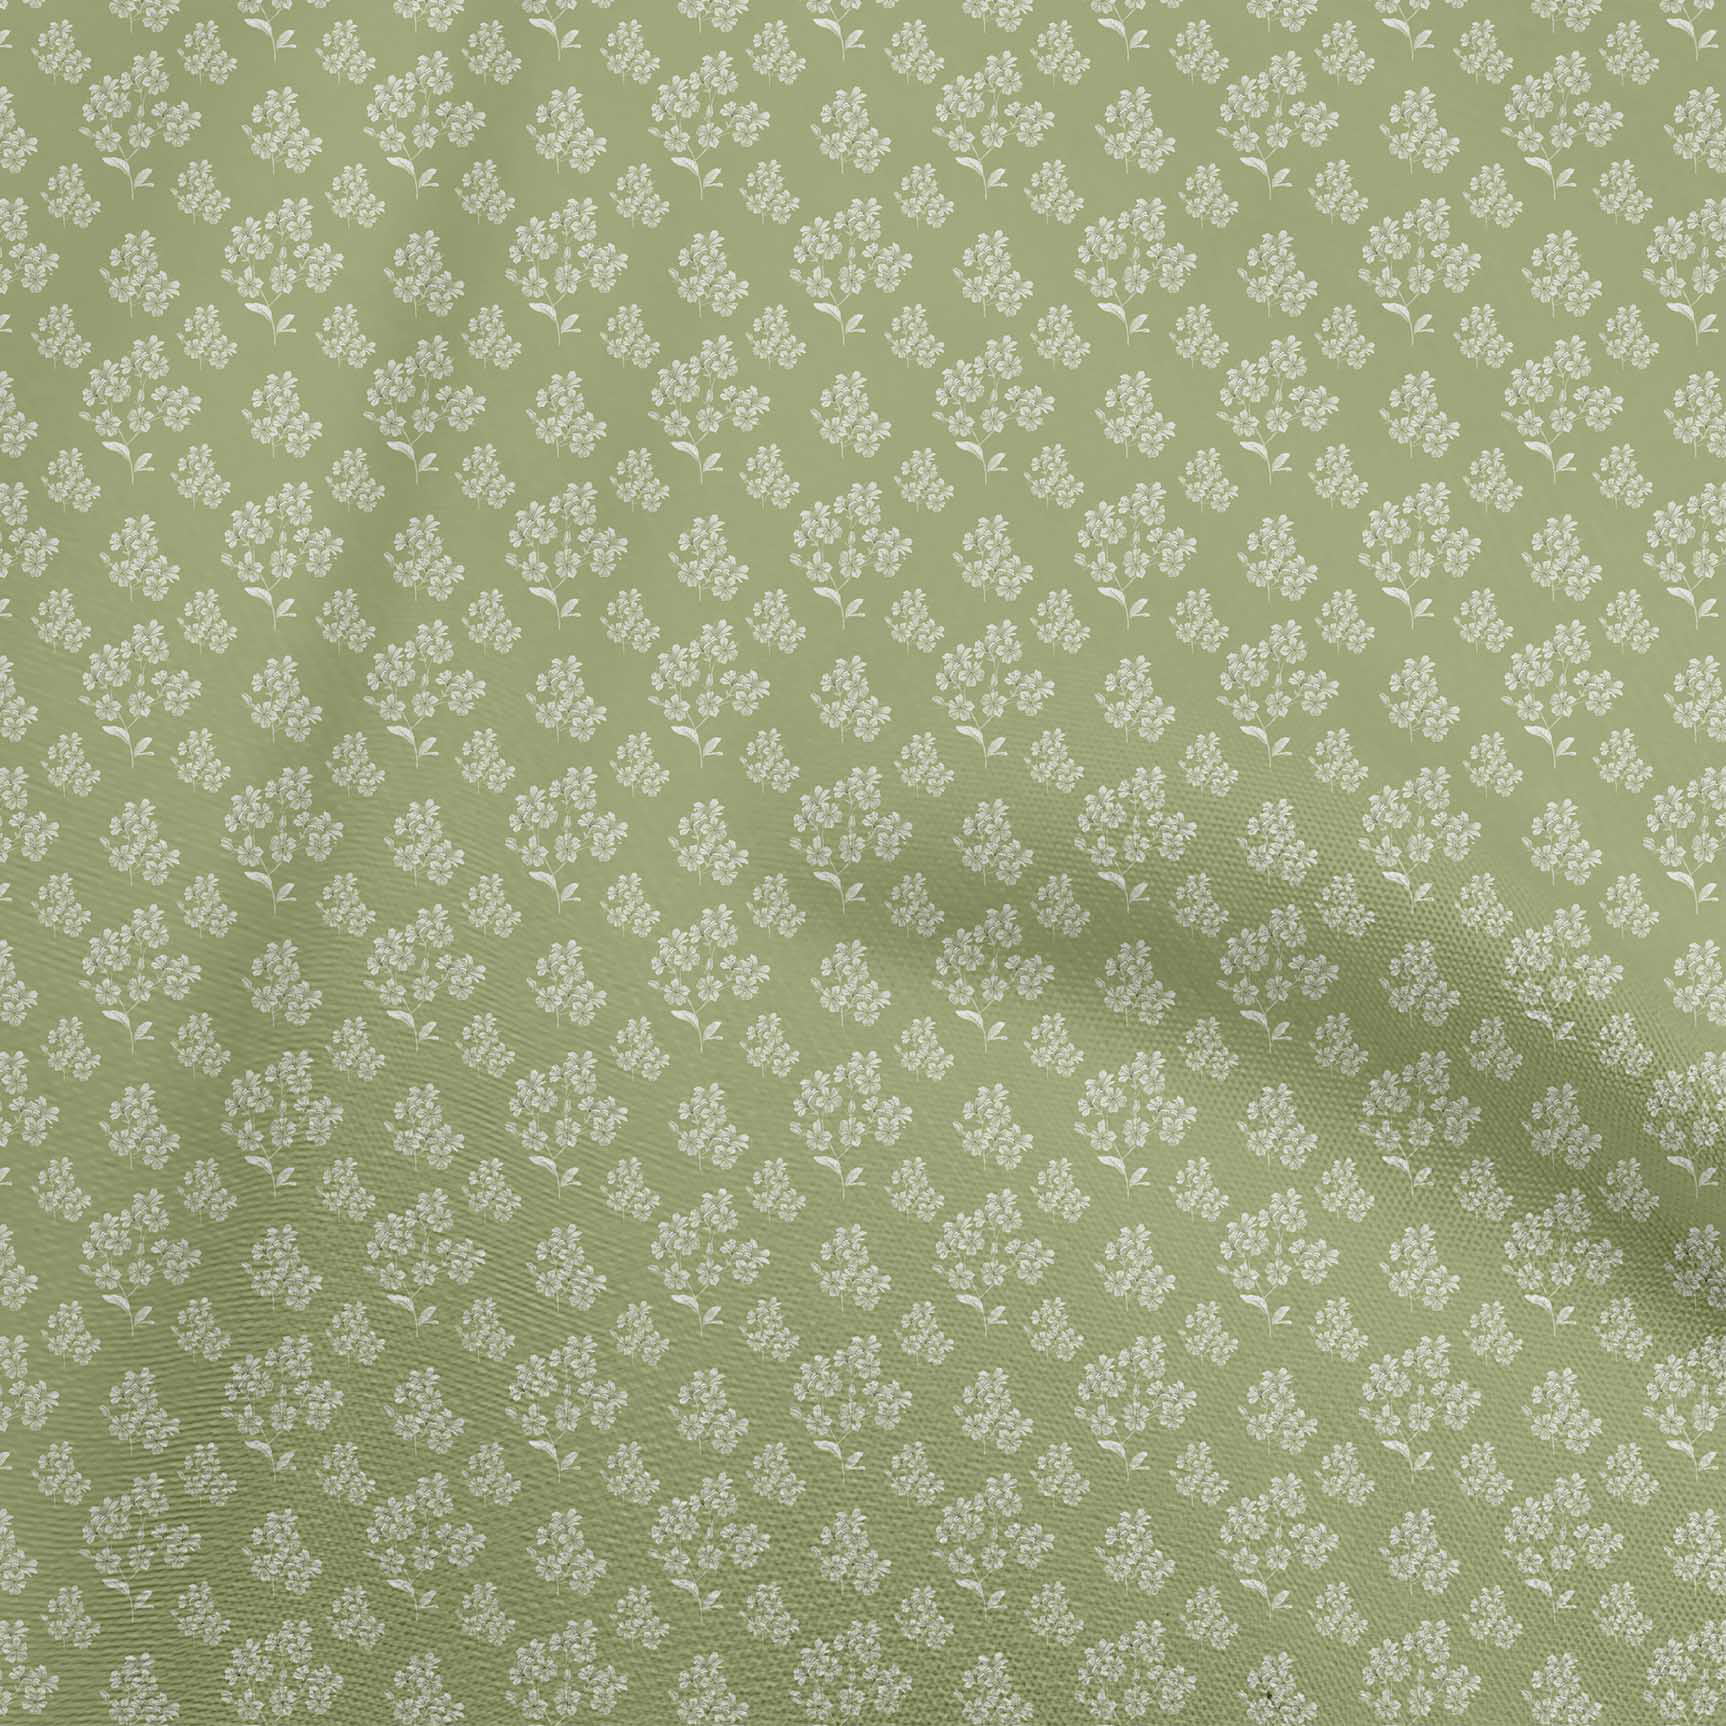 Cotton Cambric Fabric 42 Inch Wide Sewing Crafting Solid Fabrics By The Yard 